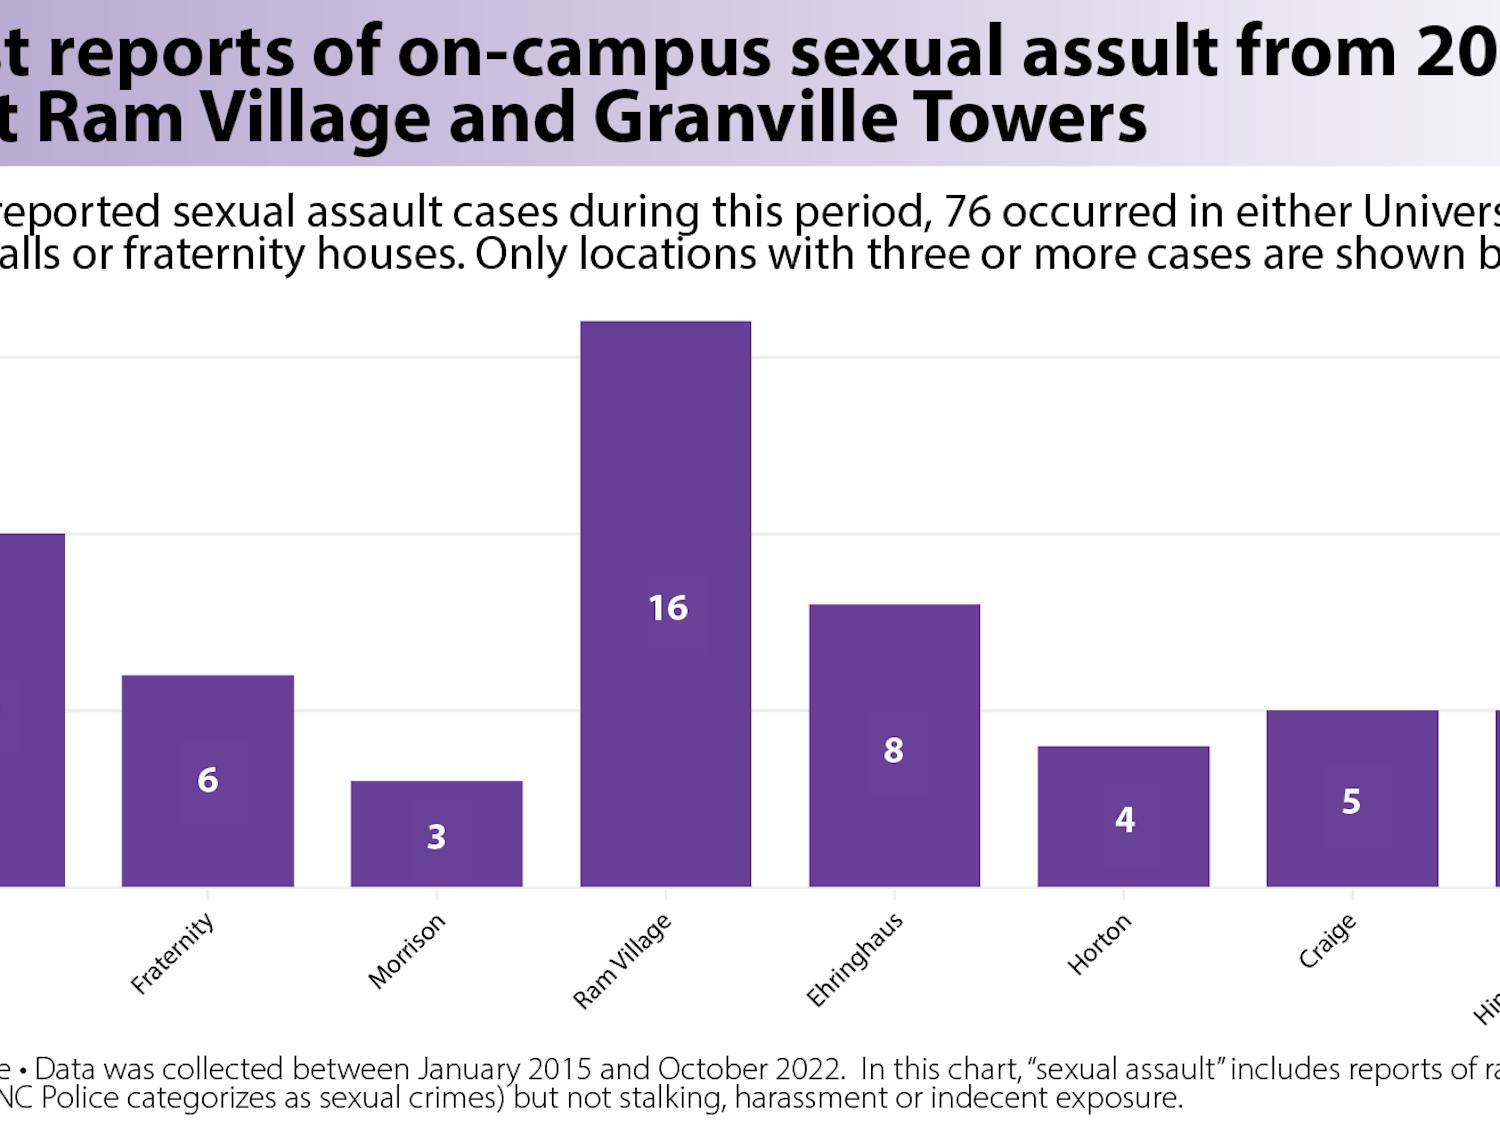 Highest reports of on-campus sexual assult from 2015 to 2022 at Ram Village and Granville Towers